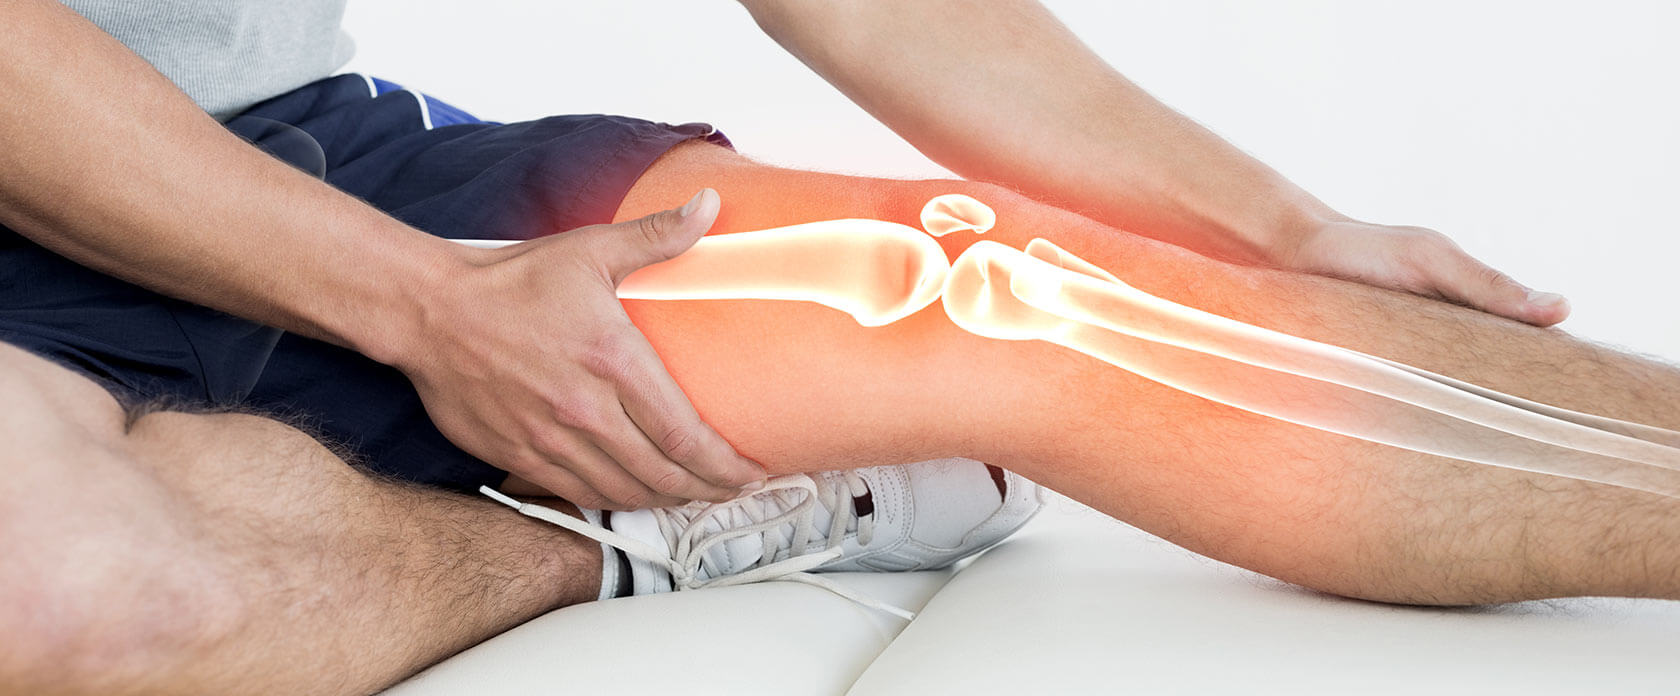 What to do about joint pain? Tips for relief 